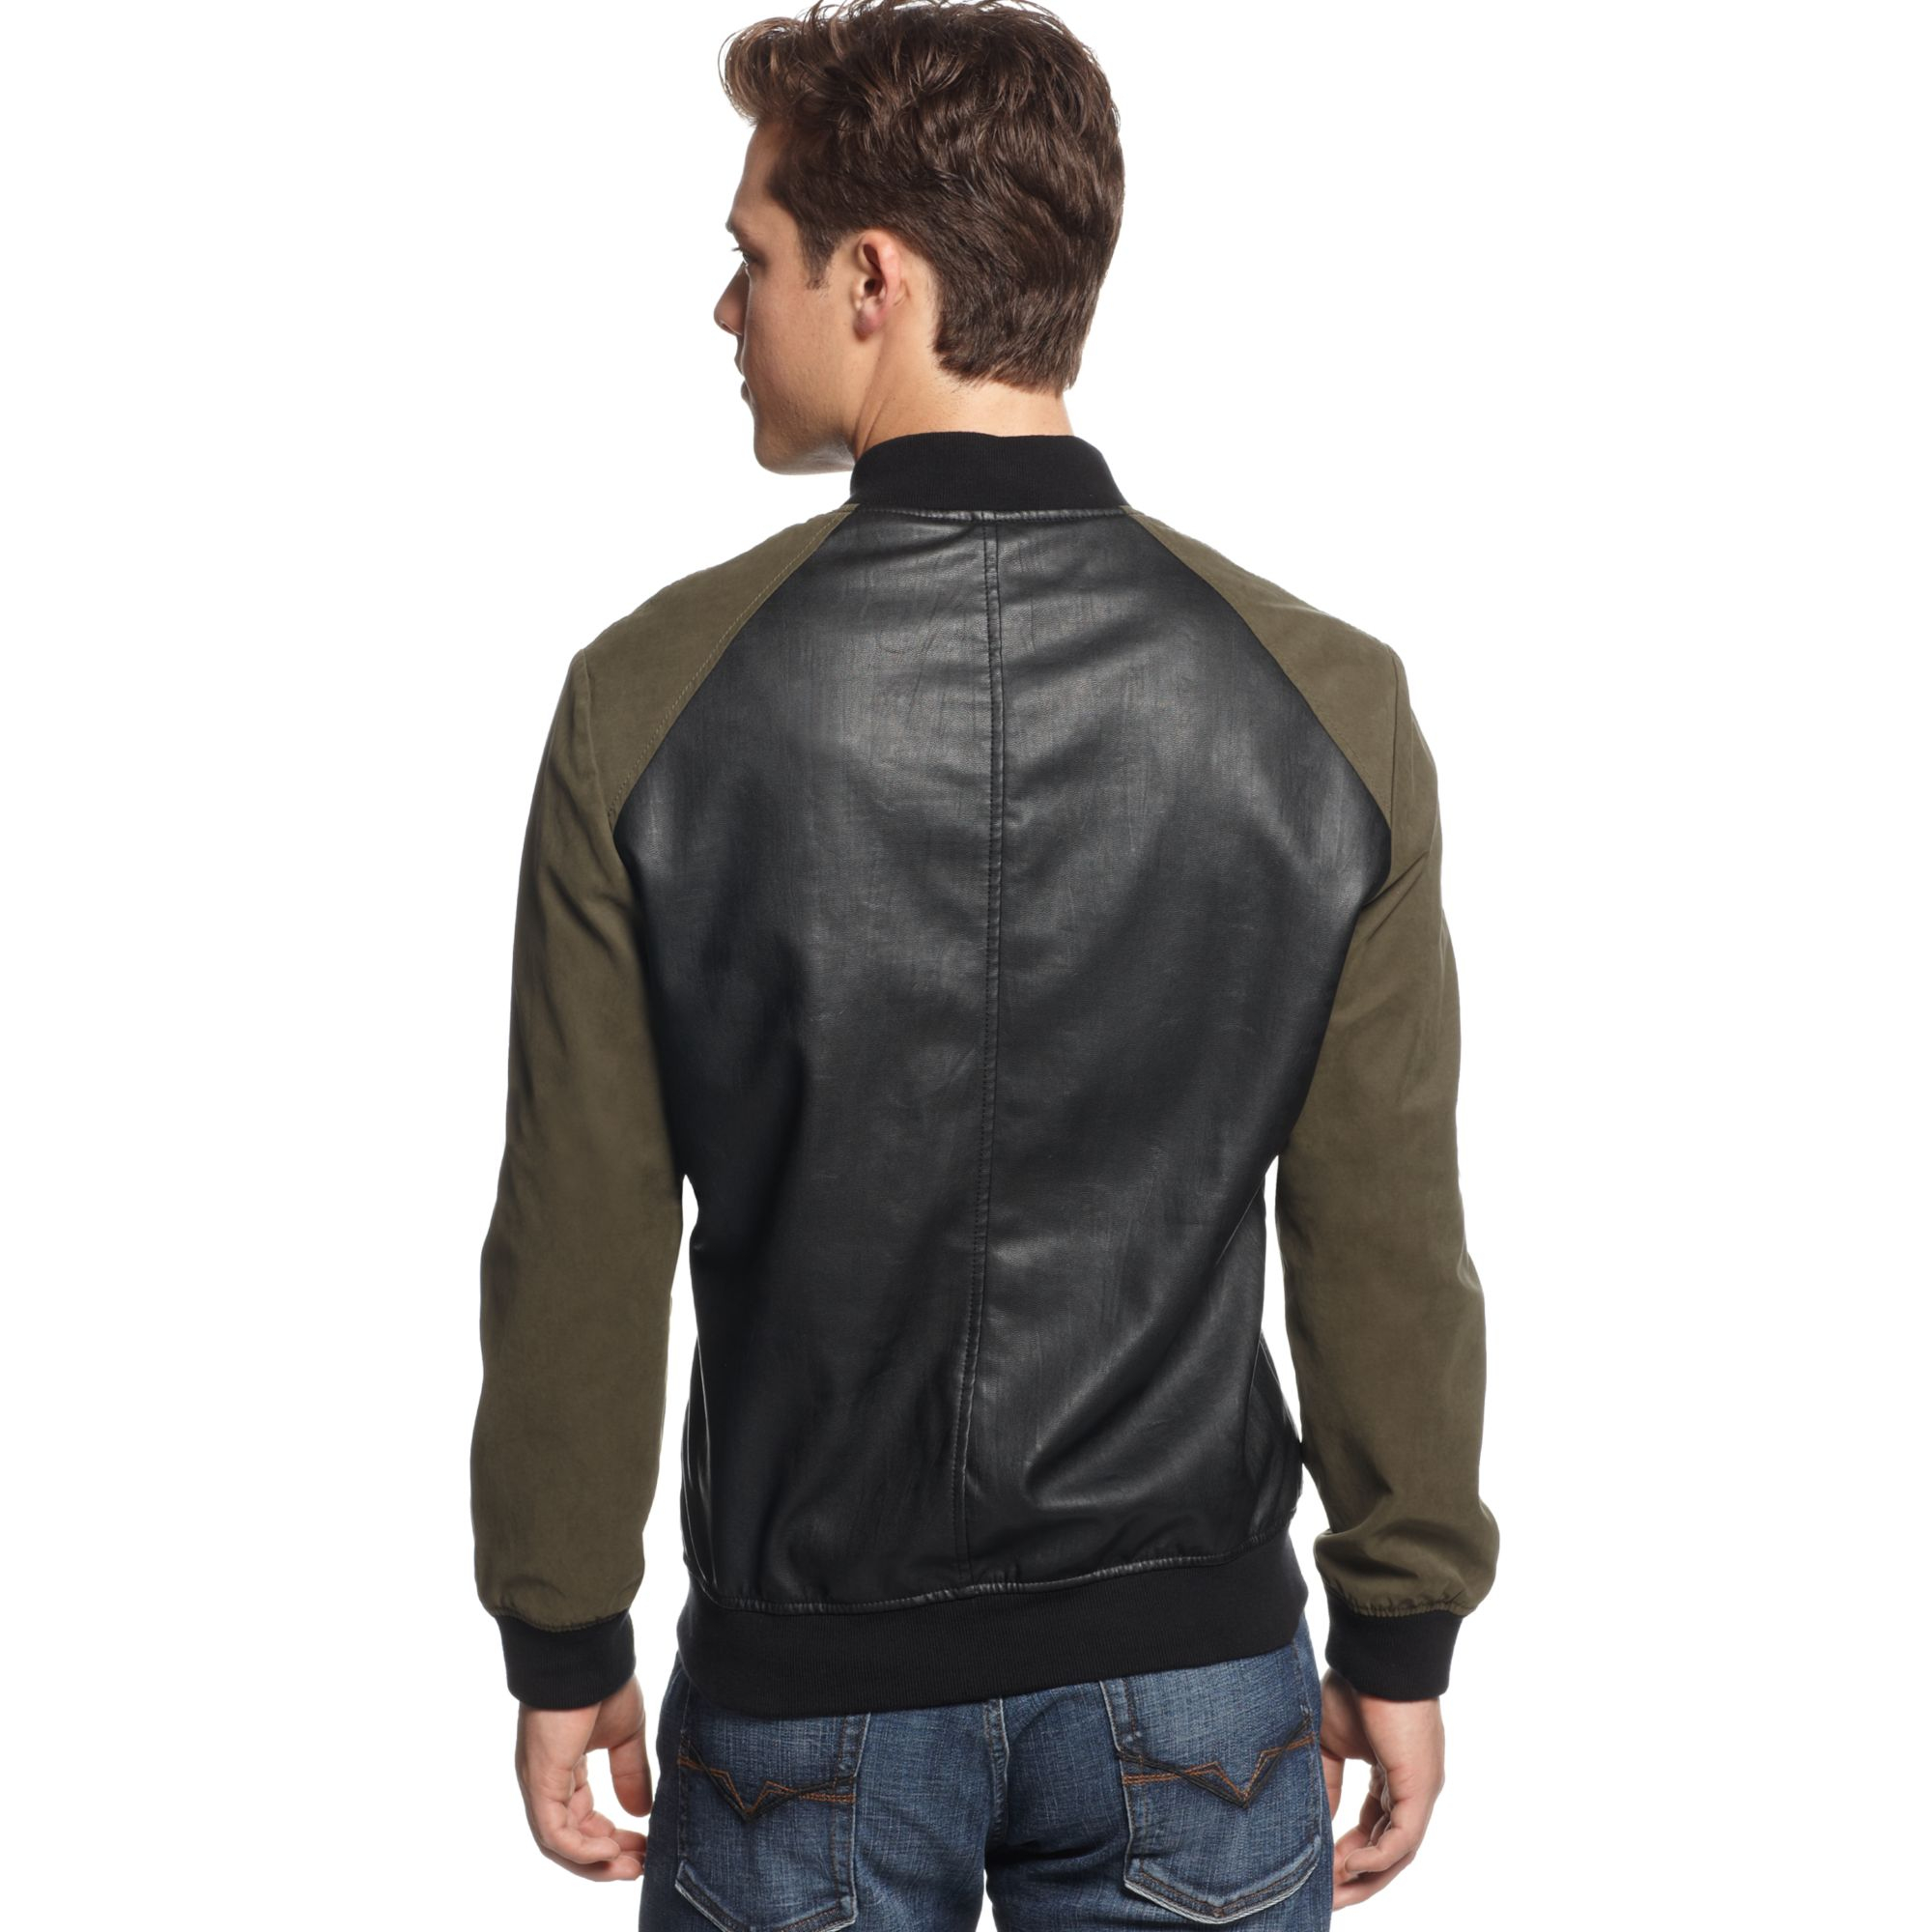 Lyst - Guess Coated Bomber Jacket in Green for Men